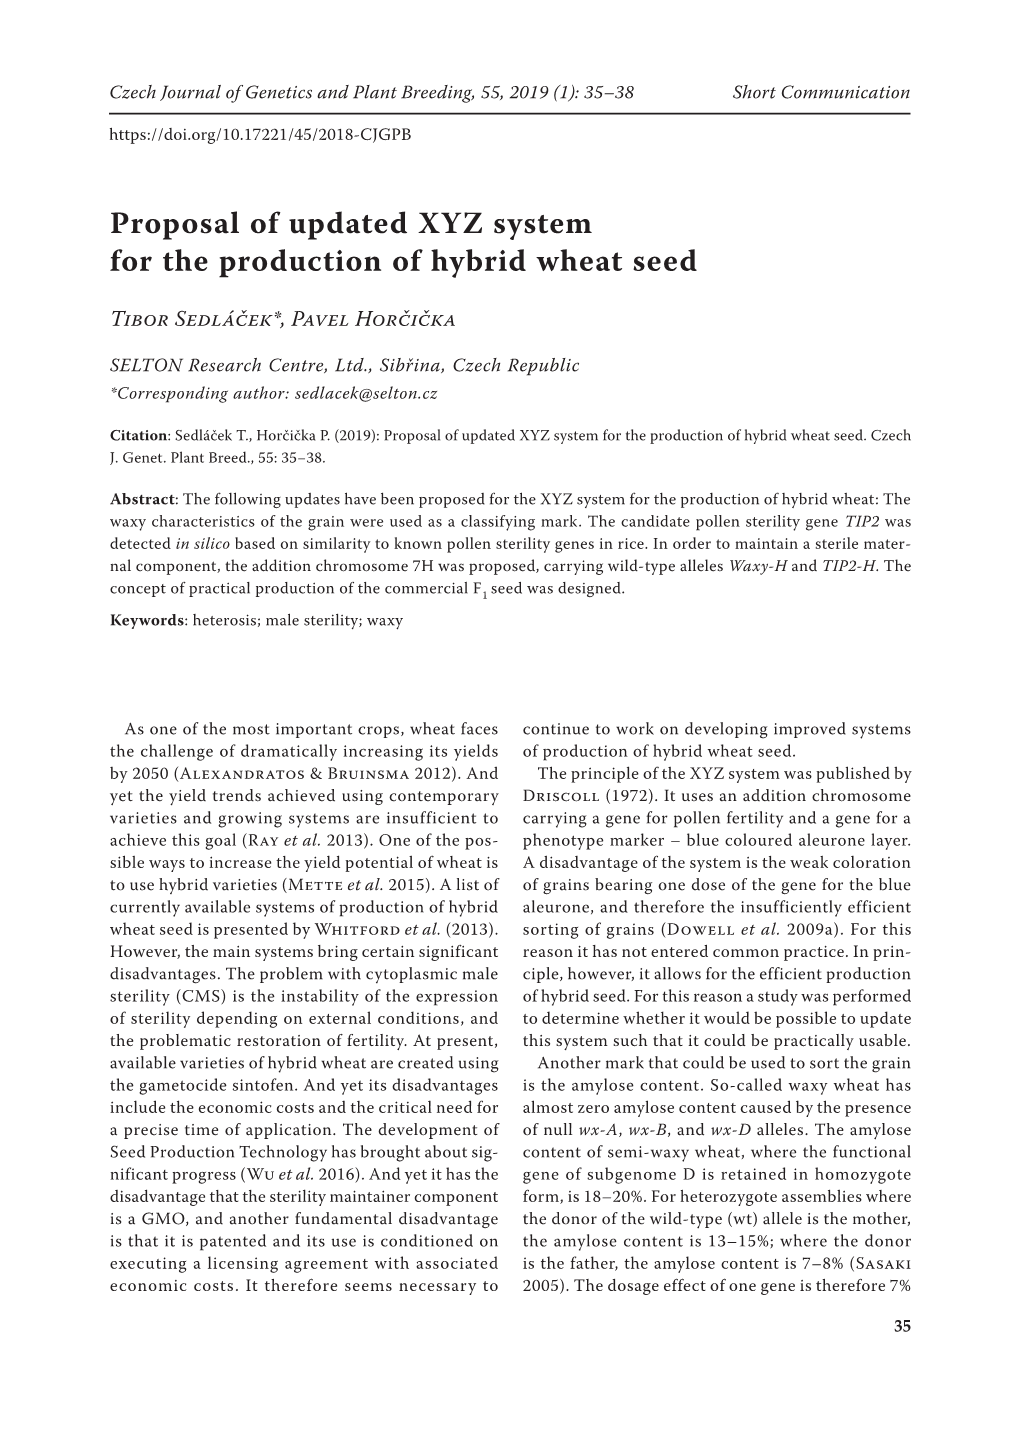 Proposal of Updated XYZ System for the Production of Hybrid Wheat Seed